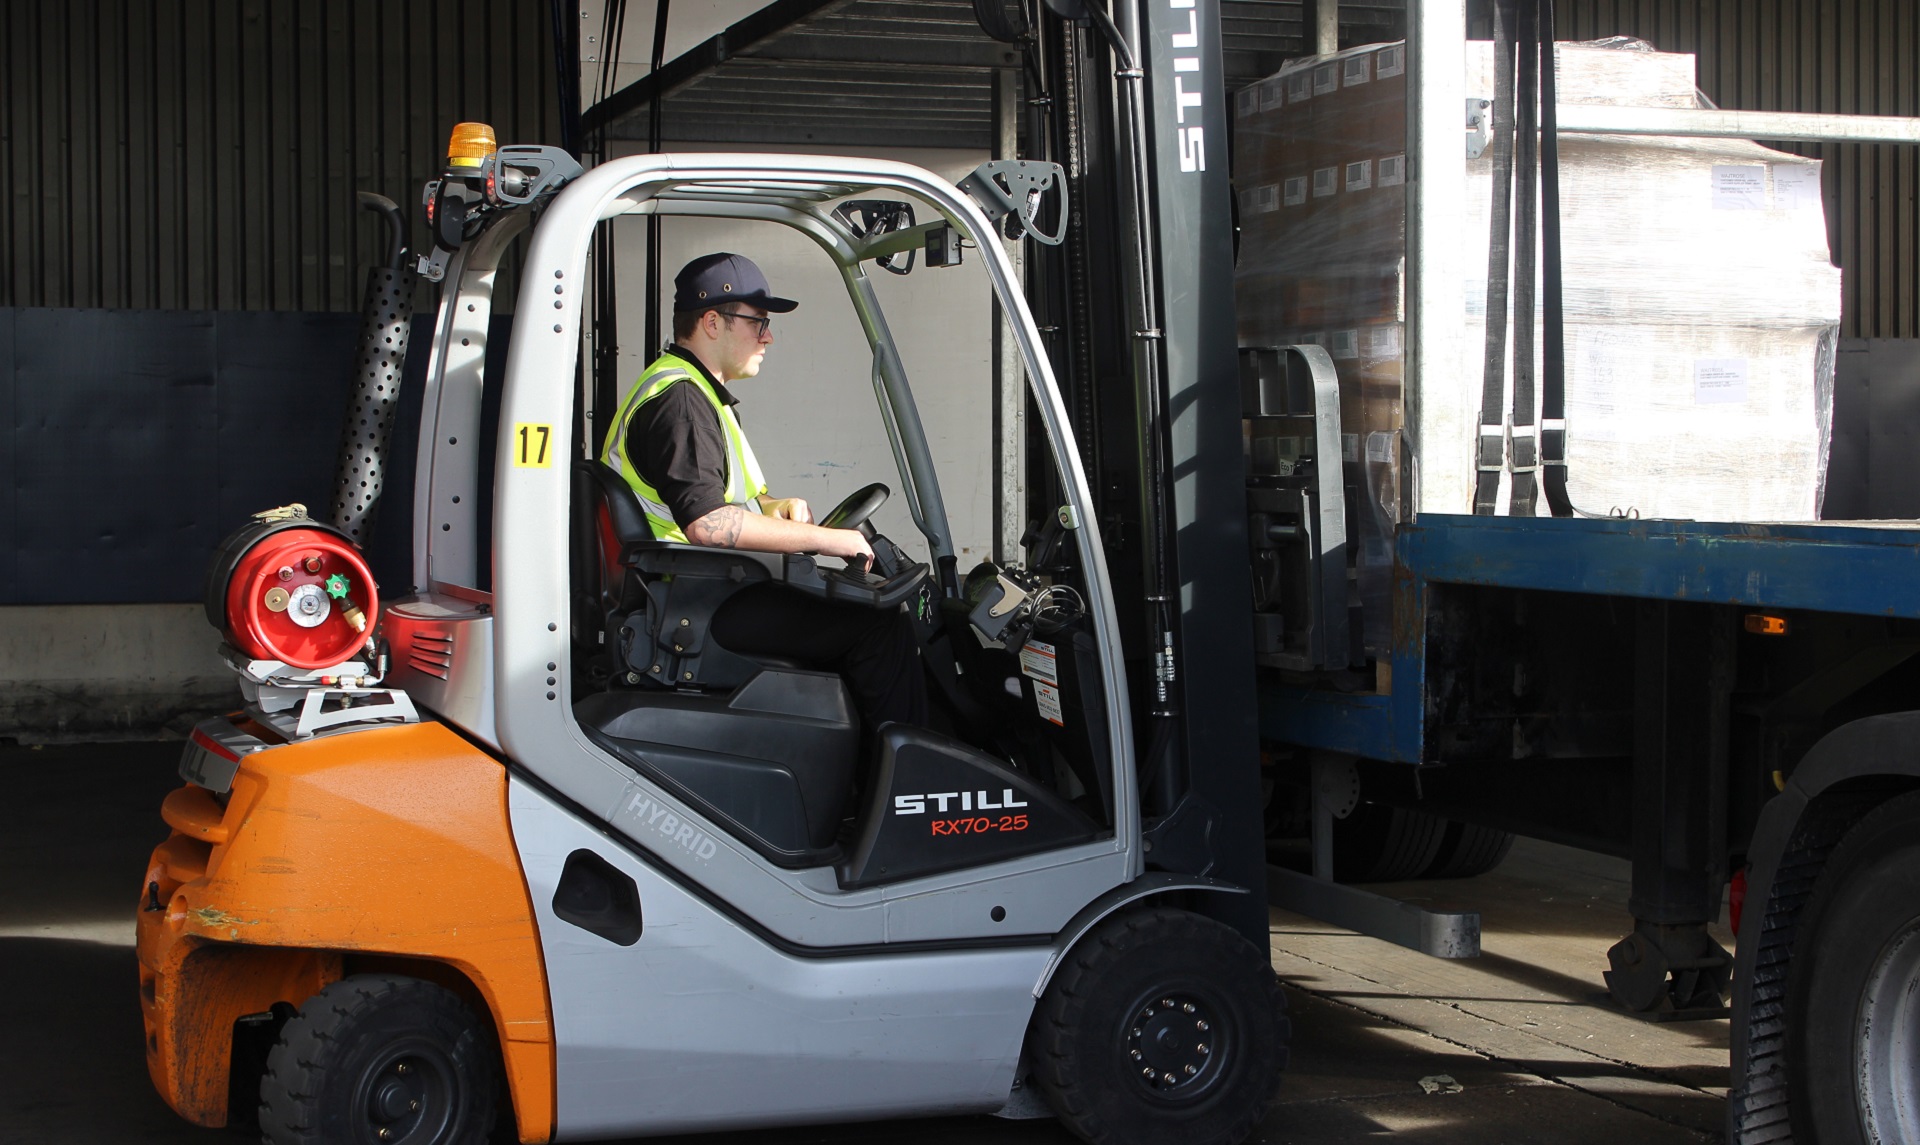 Leading Pallet Distribution Specialist Improves Loading Safety Using Forklift Scales